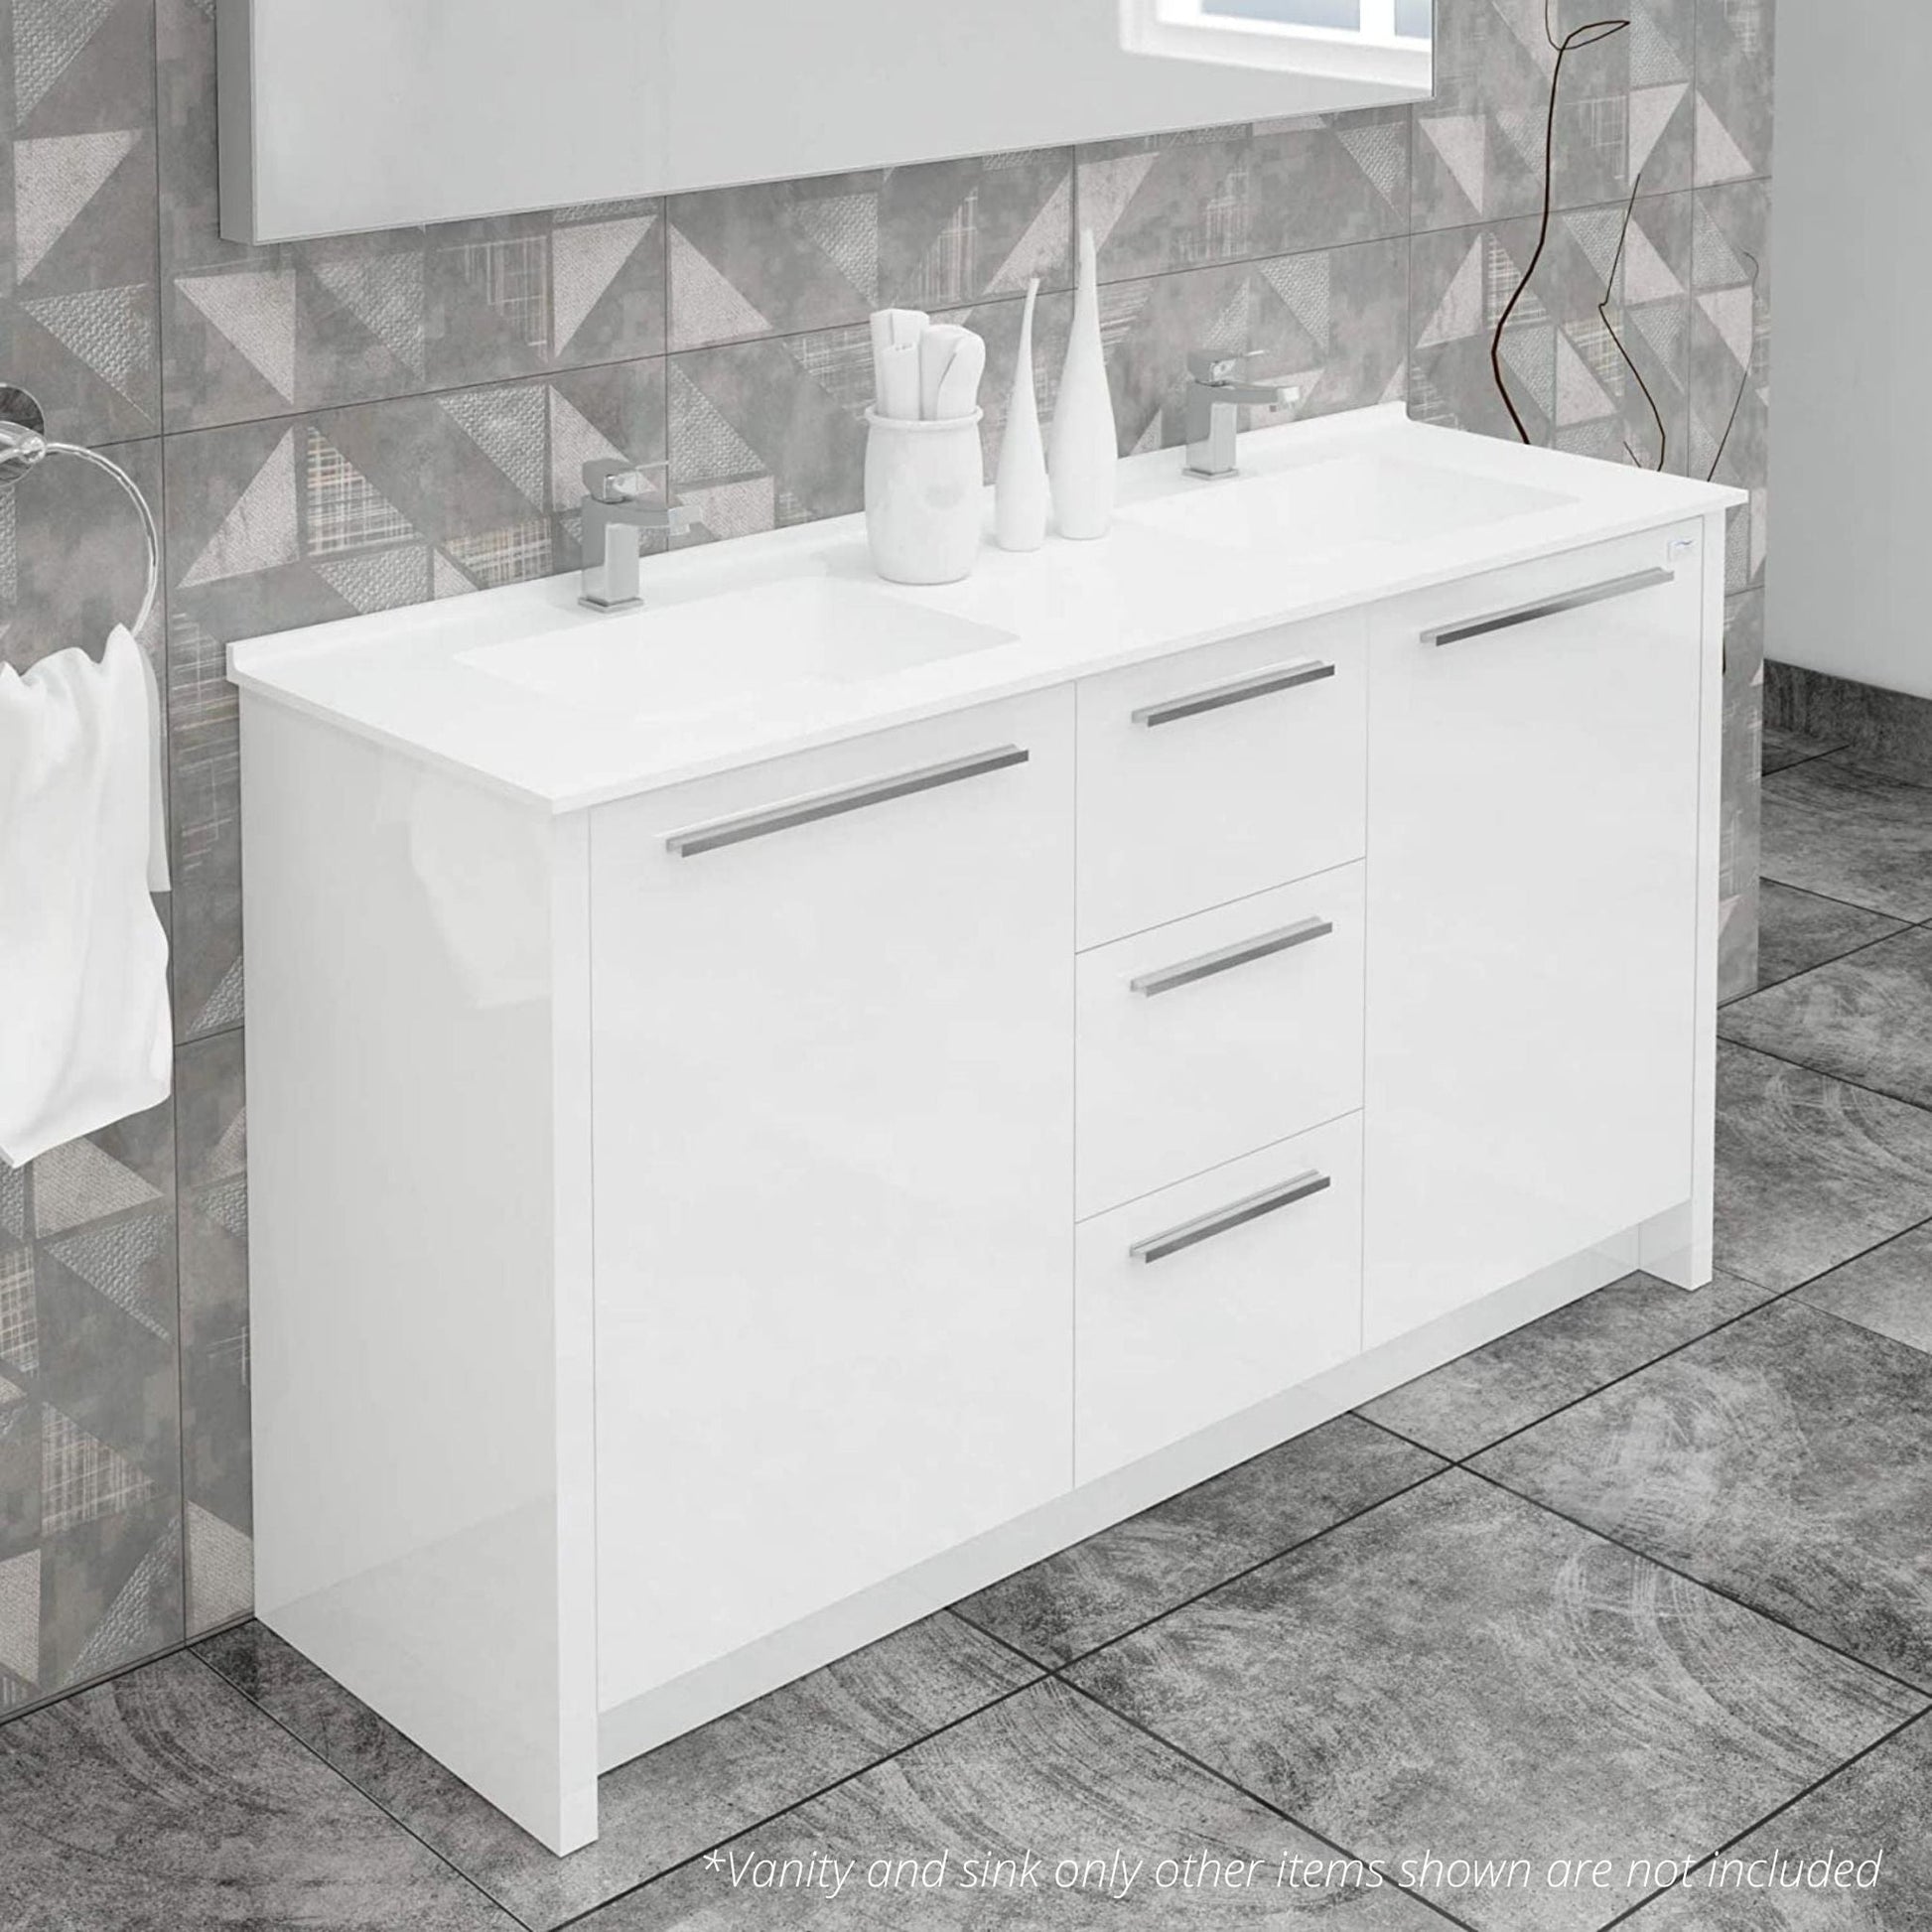 Casa Mare Nona 60" Glossy White Bathroom Vanity and Acrylic Double Sink Combo with LED Mirror